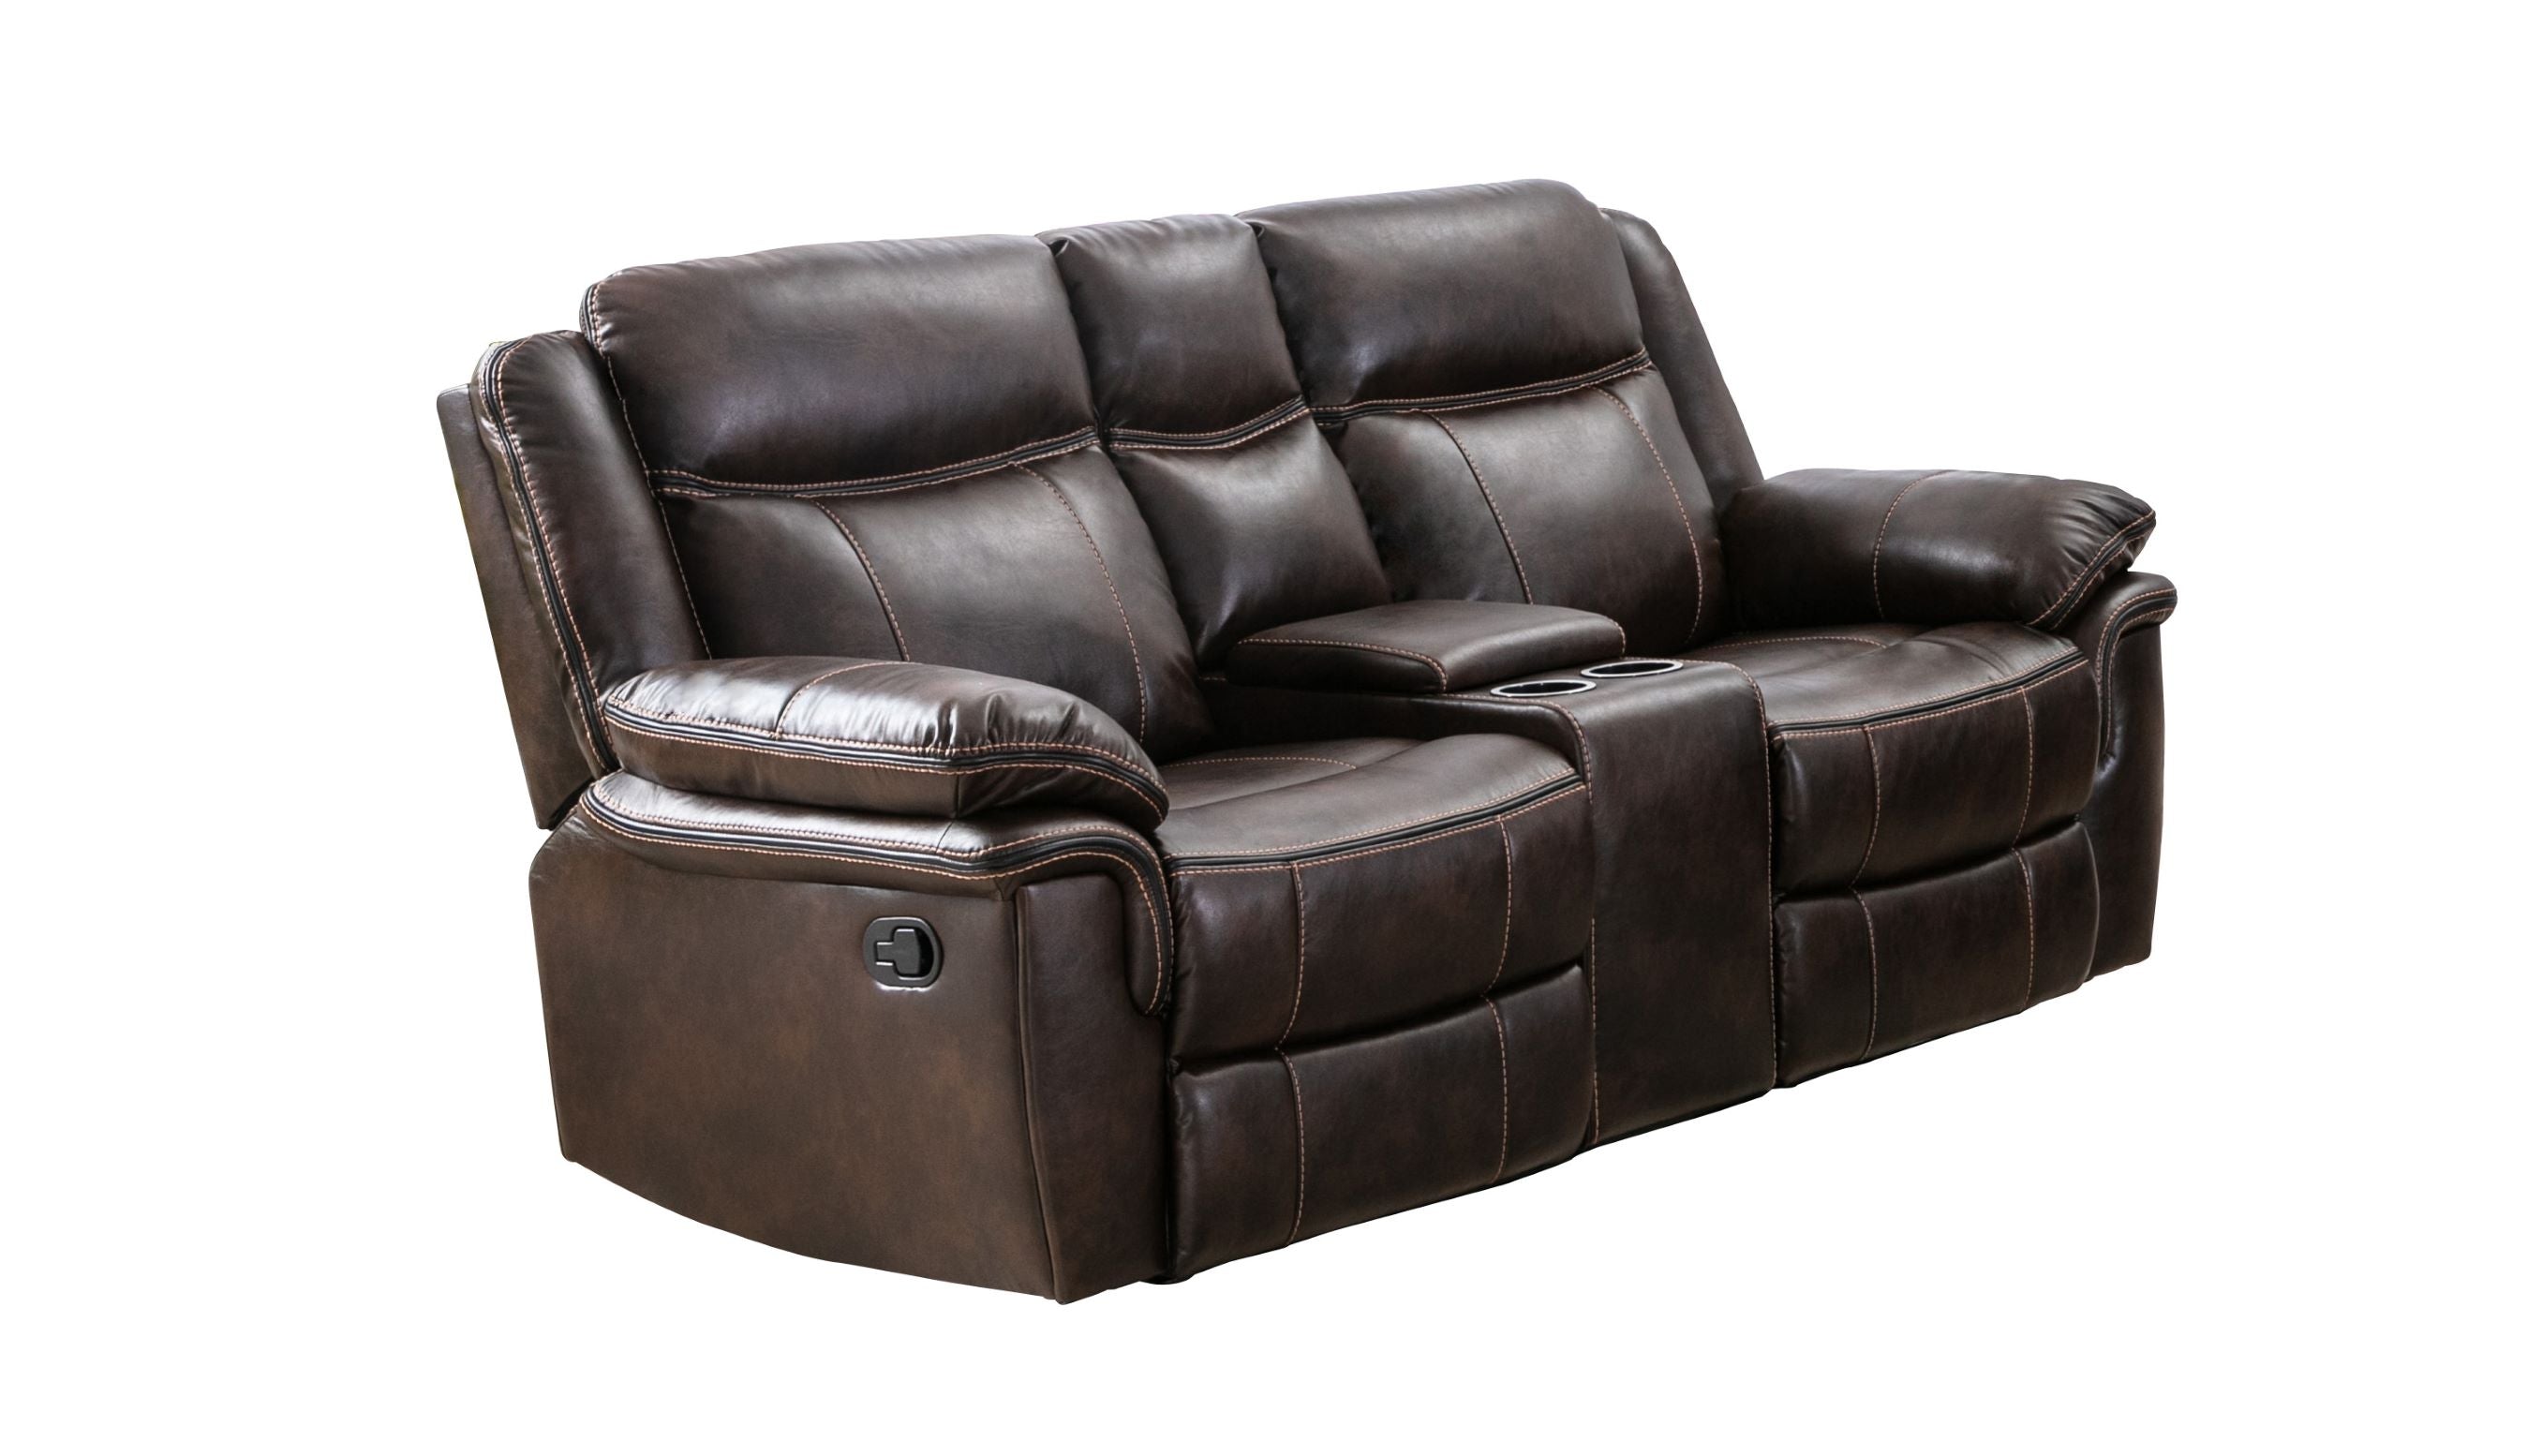 Peabody Recliner Sofa Collection Brown 99933